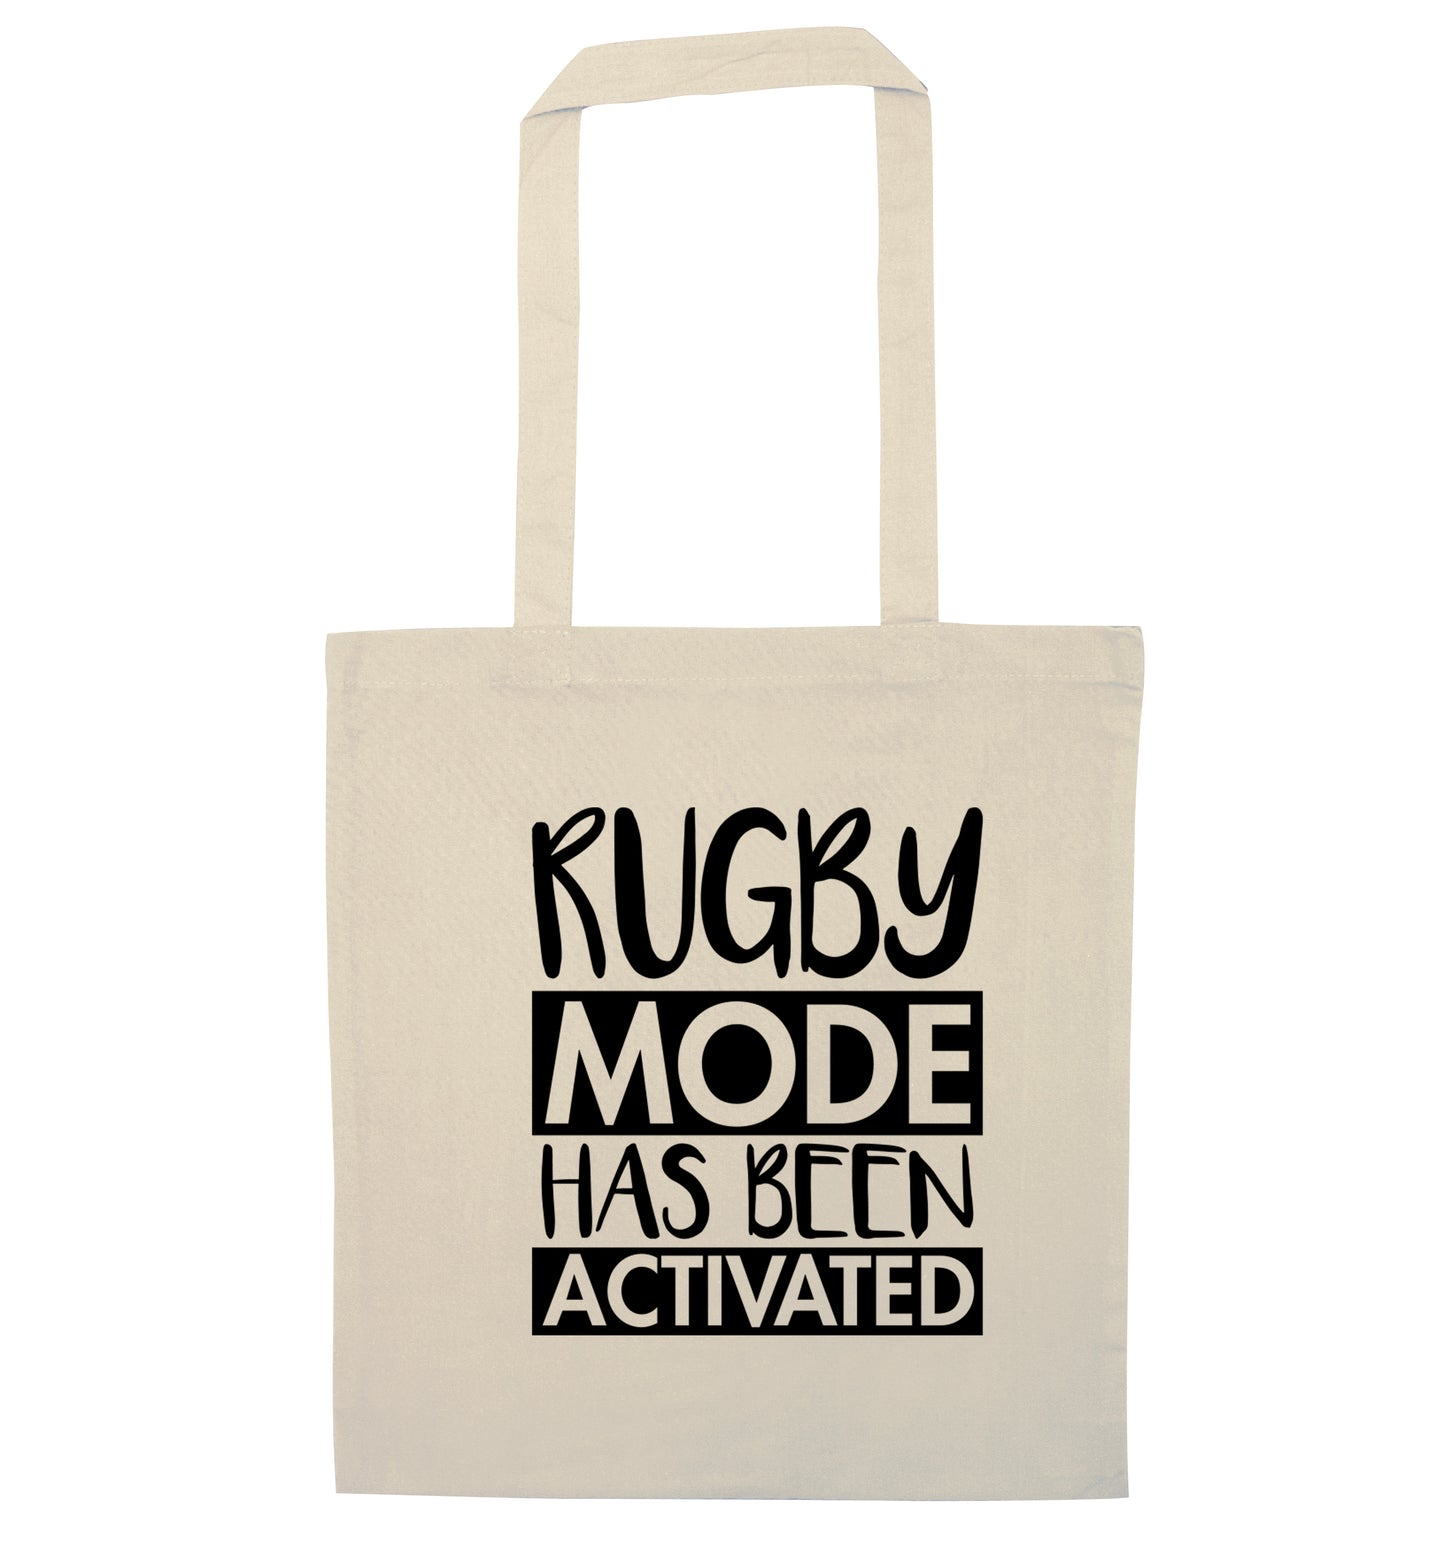 Rugby mode activated natural tote bag